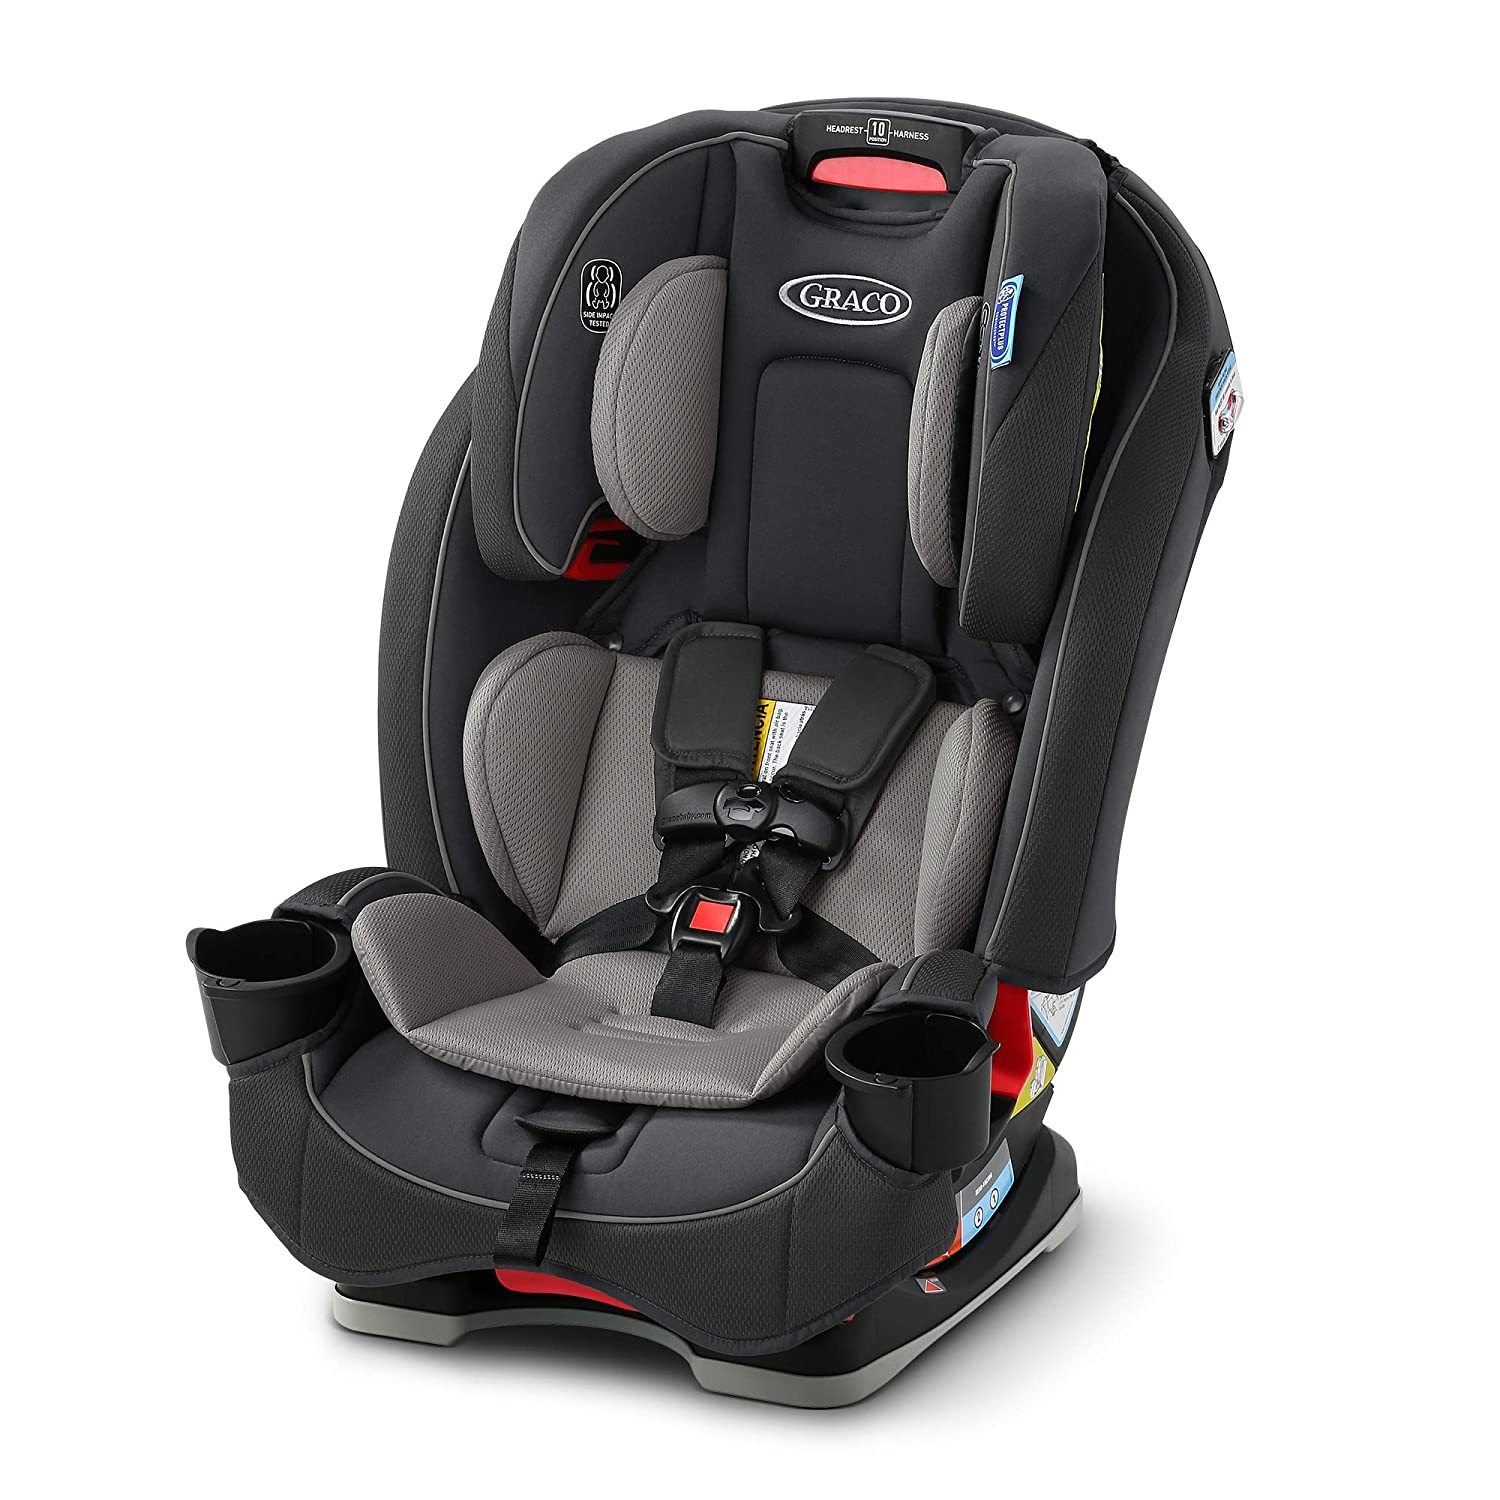 up-to-40-off-graco-baby-car-seats-strollers-and-more